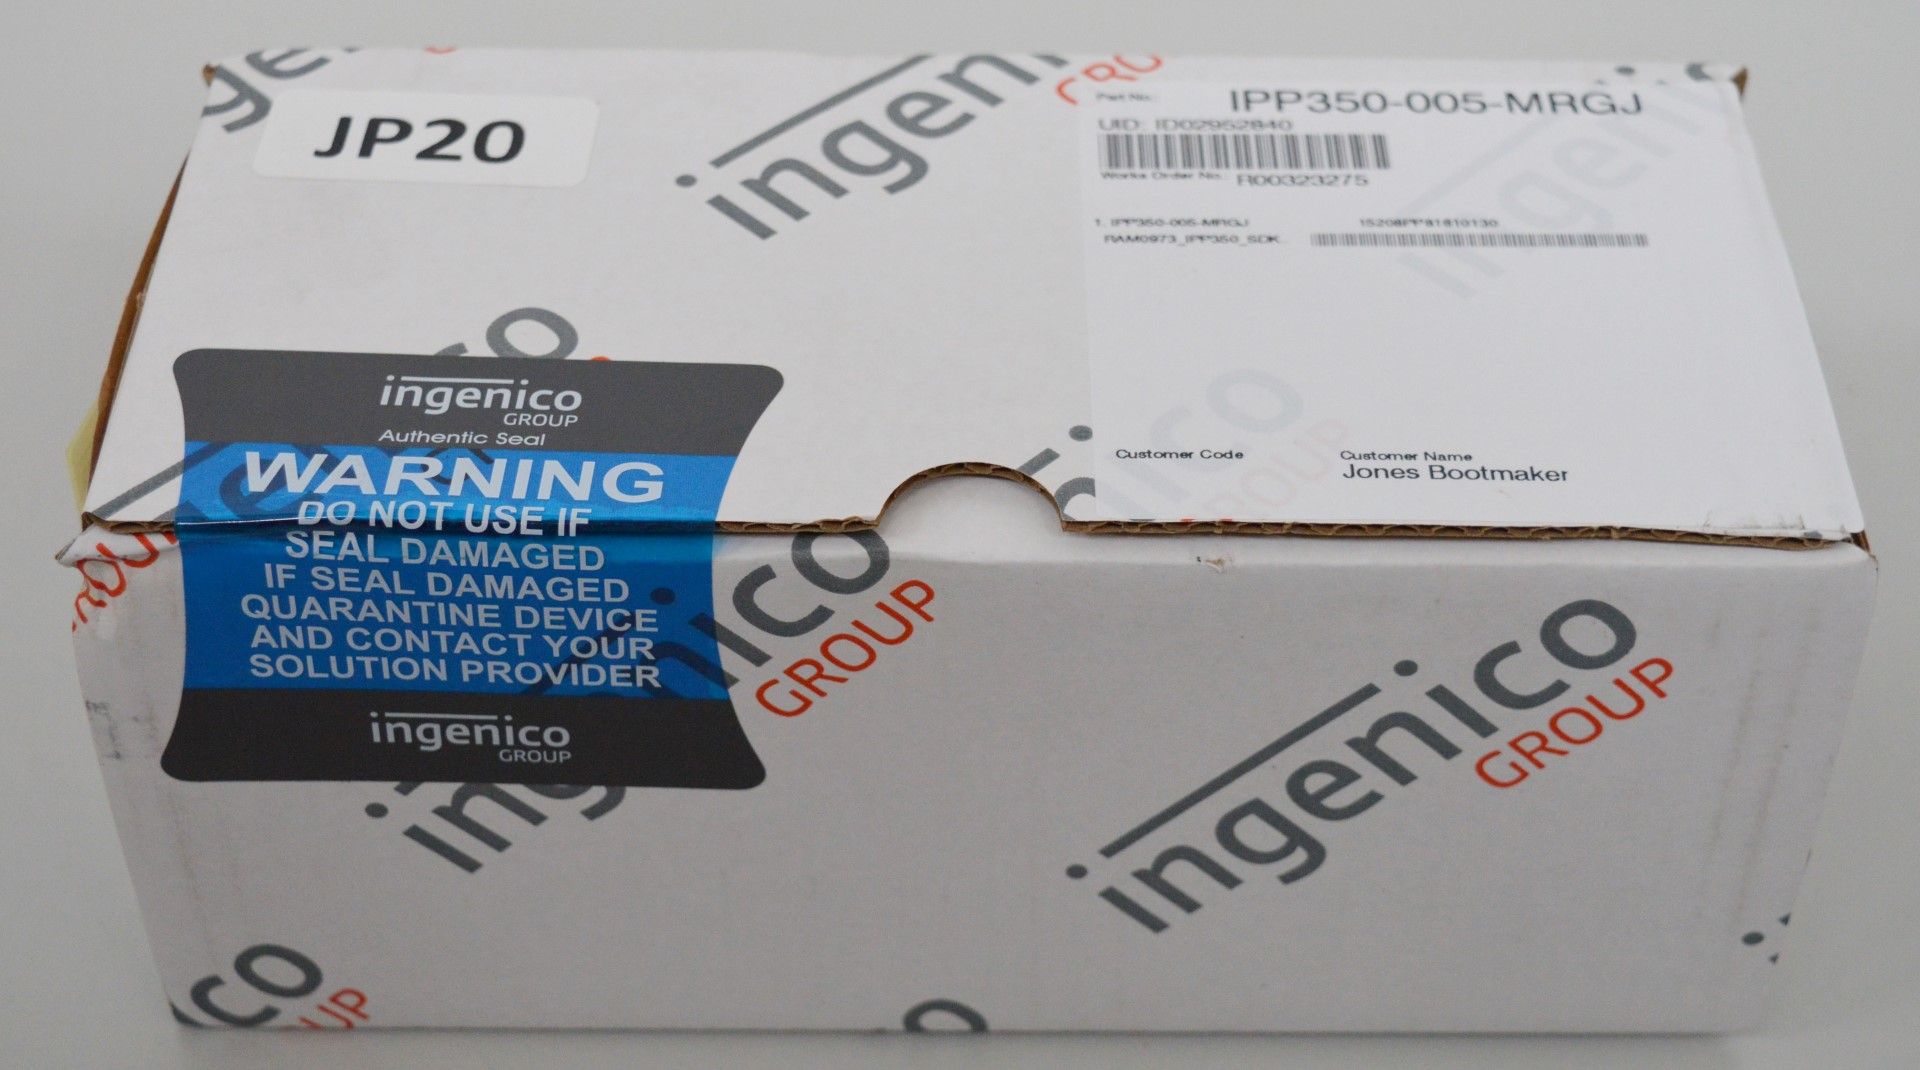 1 x Ingenico iPP350 Card Reader Chip and Pin Contactless Terminal With USB Cable - New Sealed - Image 2 of 3